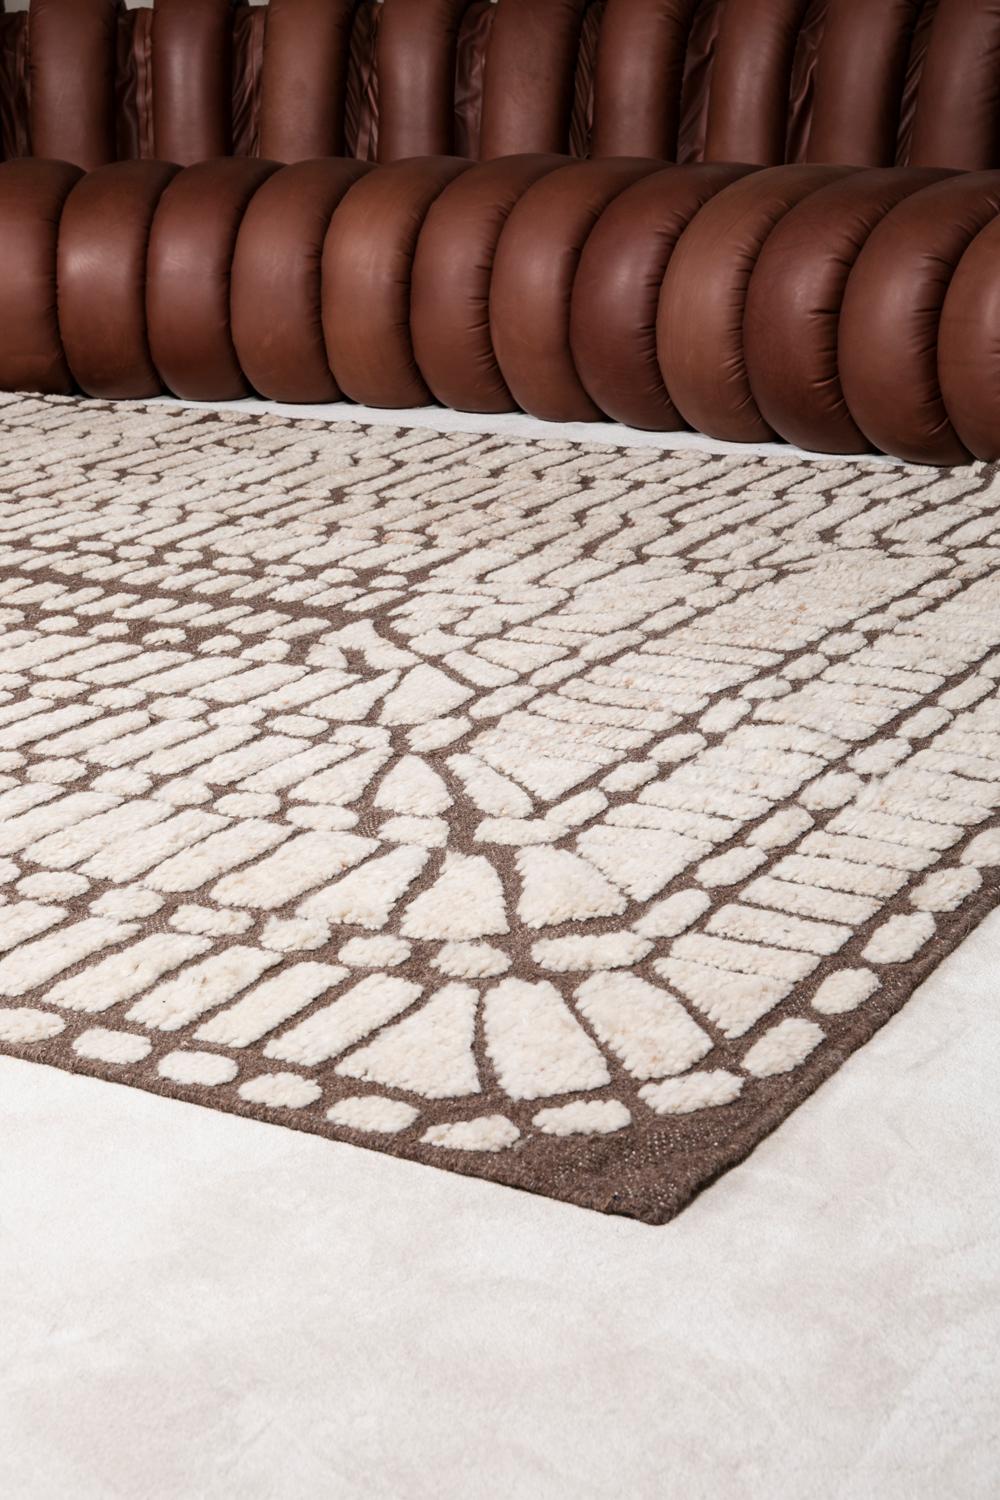 Modern Handknotted 100% Merino Wool Rug High Pile & Flatweave White&Brown Asante In New Condition For Sale In Madrid, ES